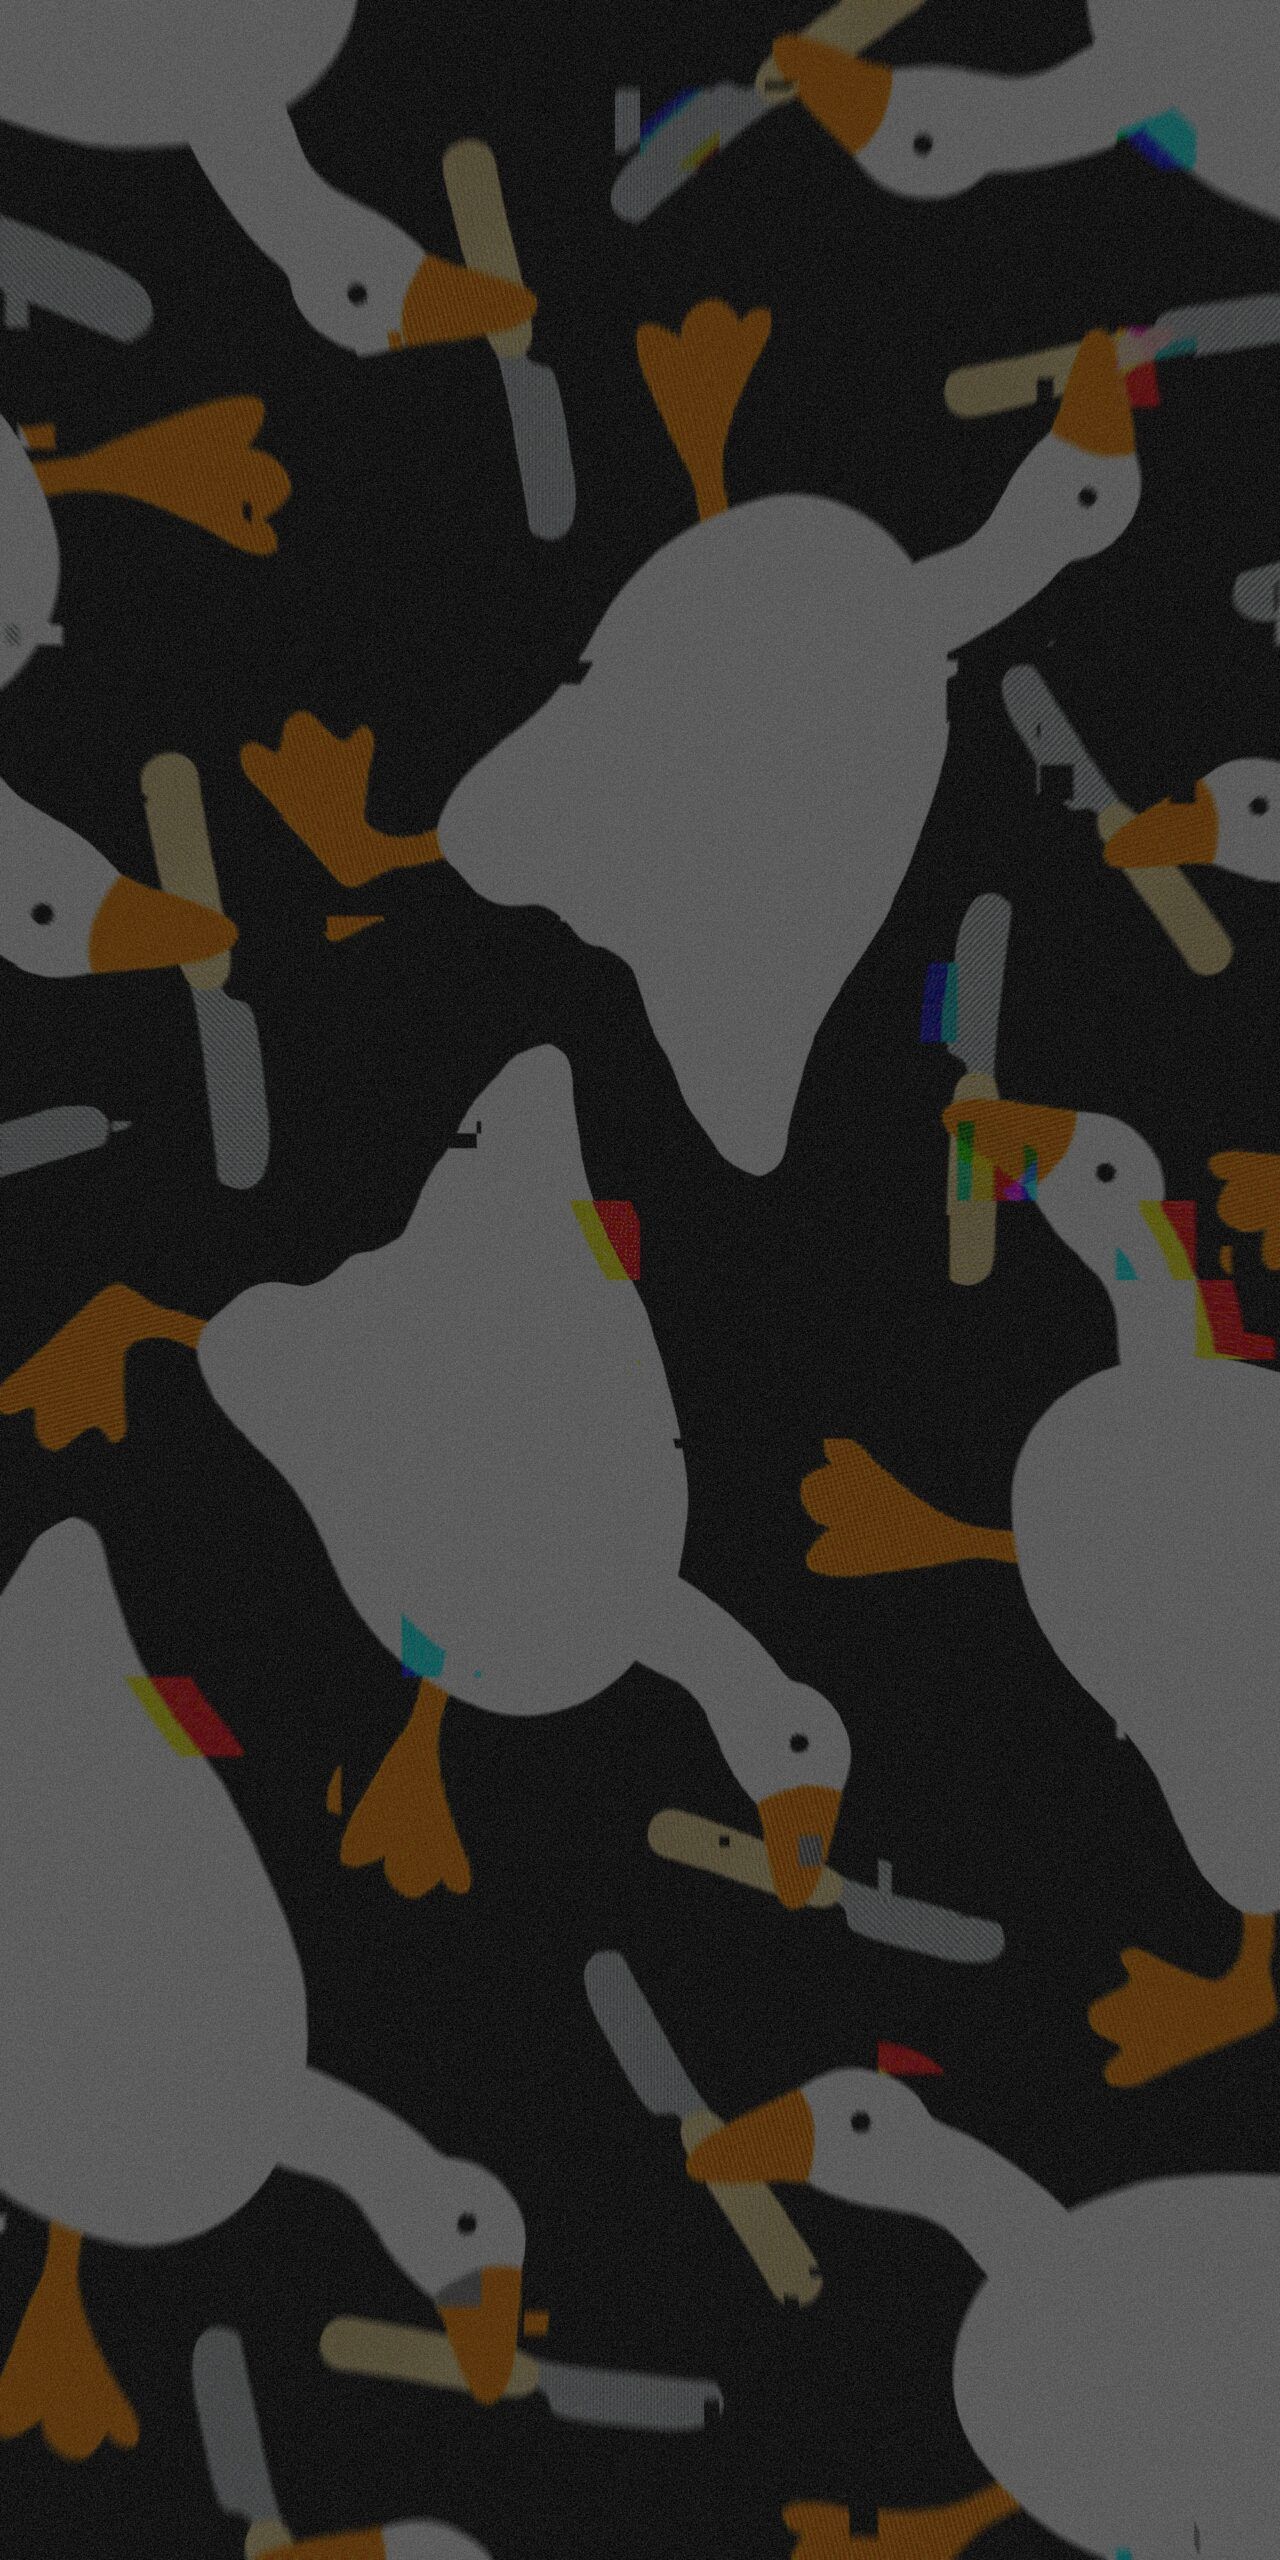 A wallpaper of a bunch of ducks with some holding knives - Duck